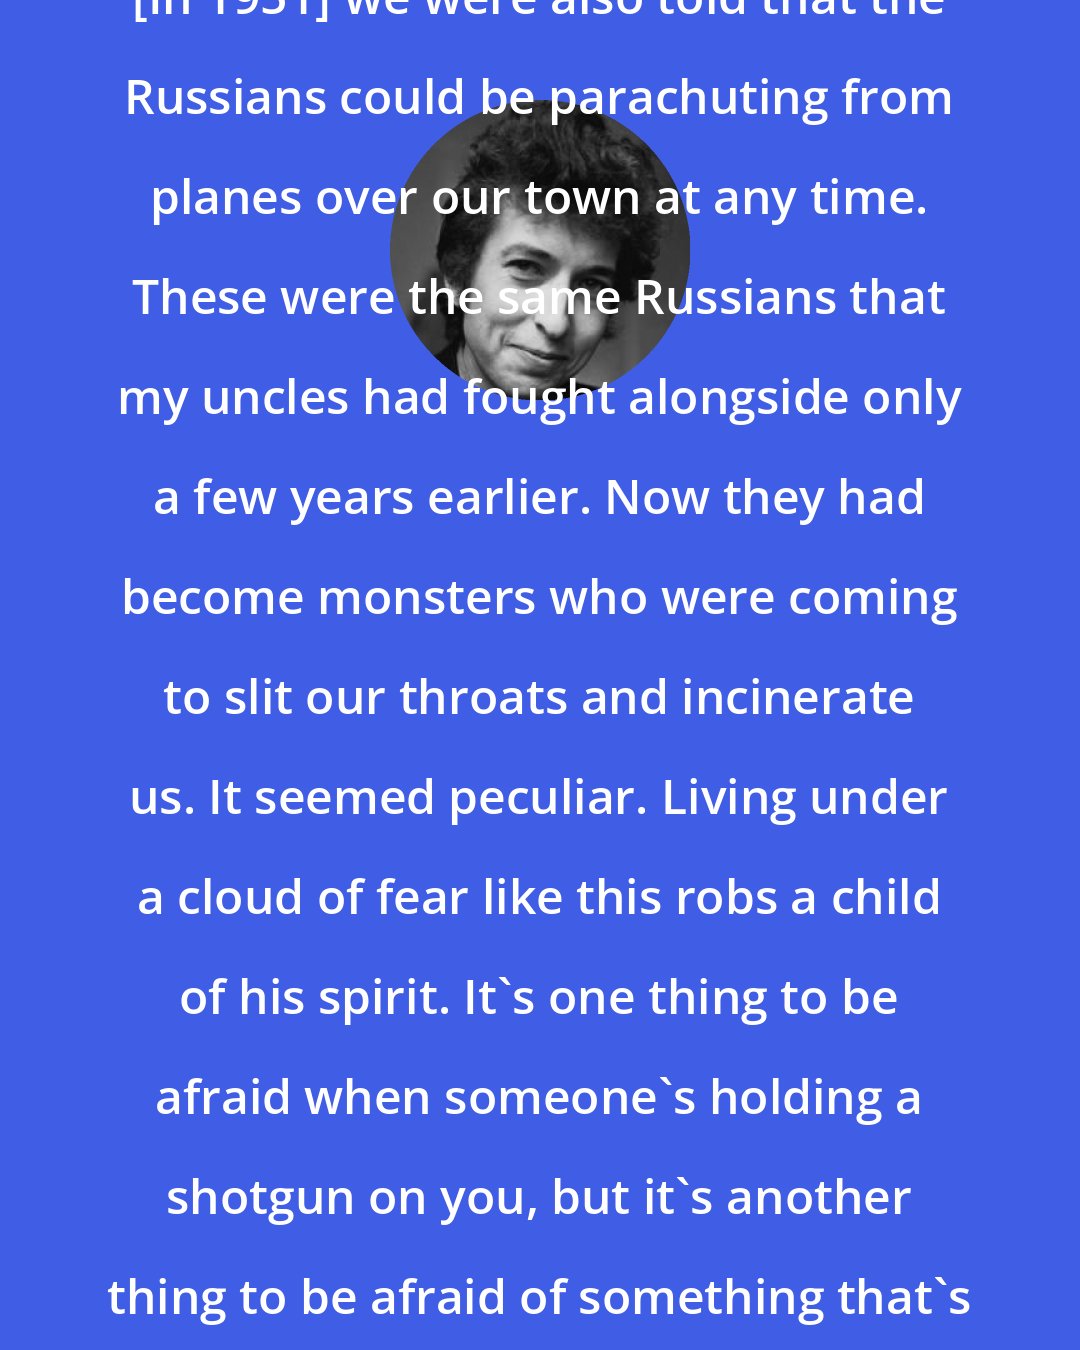 Bob Dylan: [In 1951] we were also told that the Russians could be parachuting from planes over our town at any time. These were the same Russians that my uncles had fought alongside only a few years earlier. Now they had become monsters who were coming to slit our throats and incinerate us. It seemed peculiar. Living under a cloud of fear like this robs a child of his spirit. It's one thing to be afraid when someone's holding a shotgun on you, but it's another thing to be afraid of something that's just not quite real.